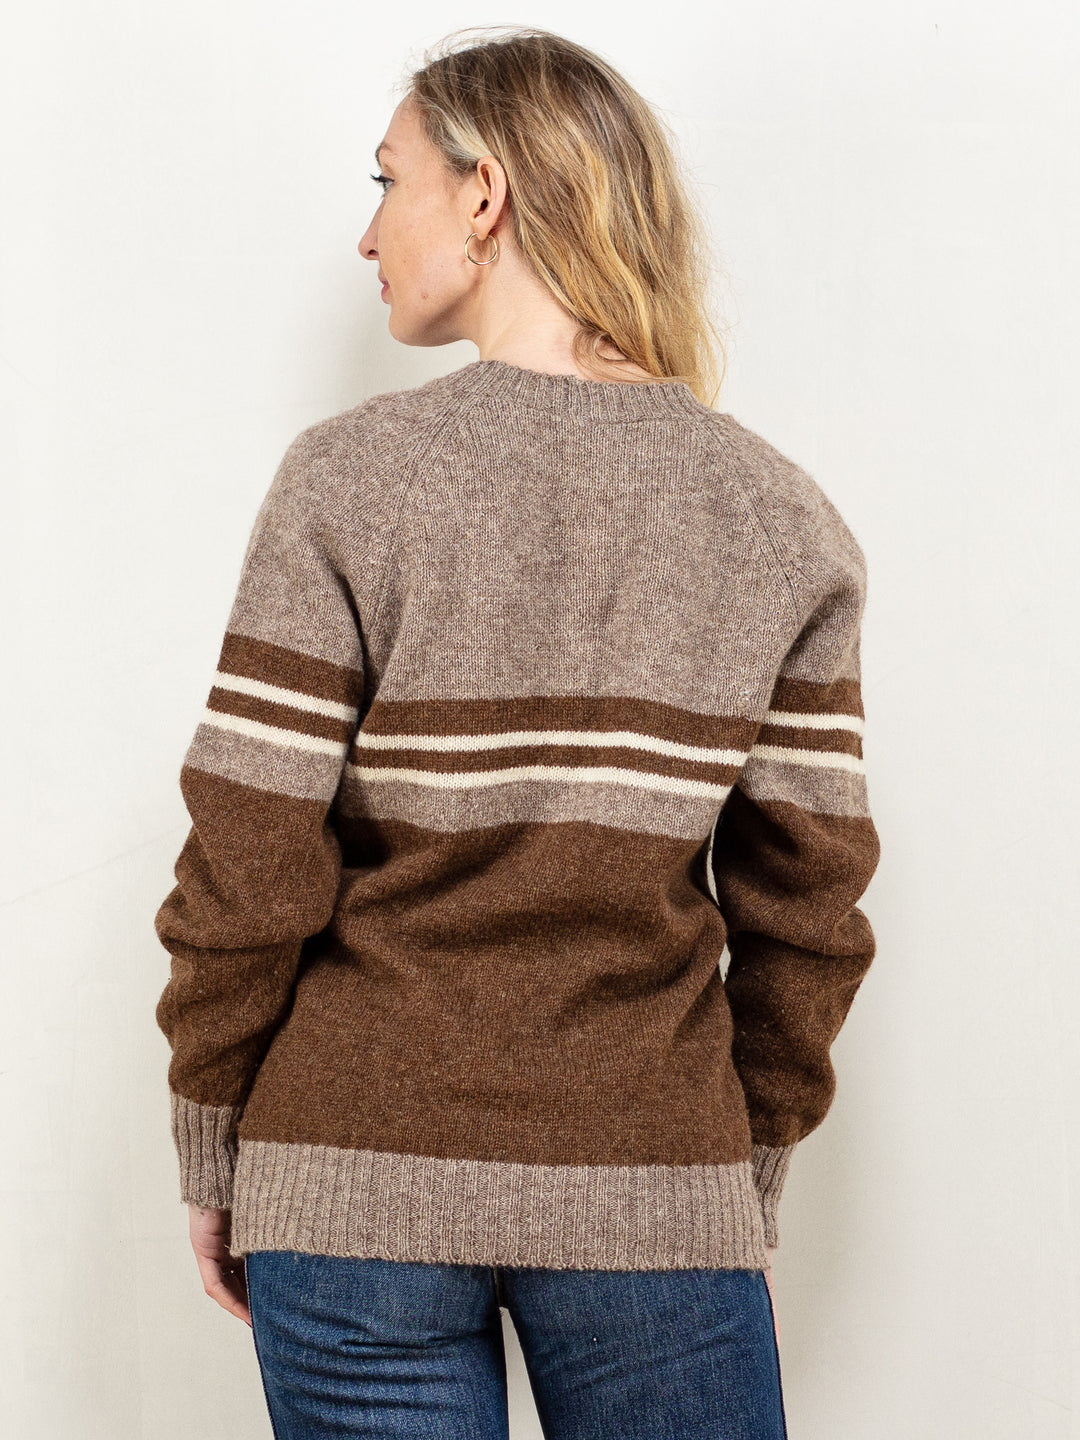 Wool Blend Cardigan women 70s vintage brown striped pattern long sleeve V-neckline knitted jacket button up knit boho style plain size small